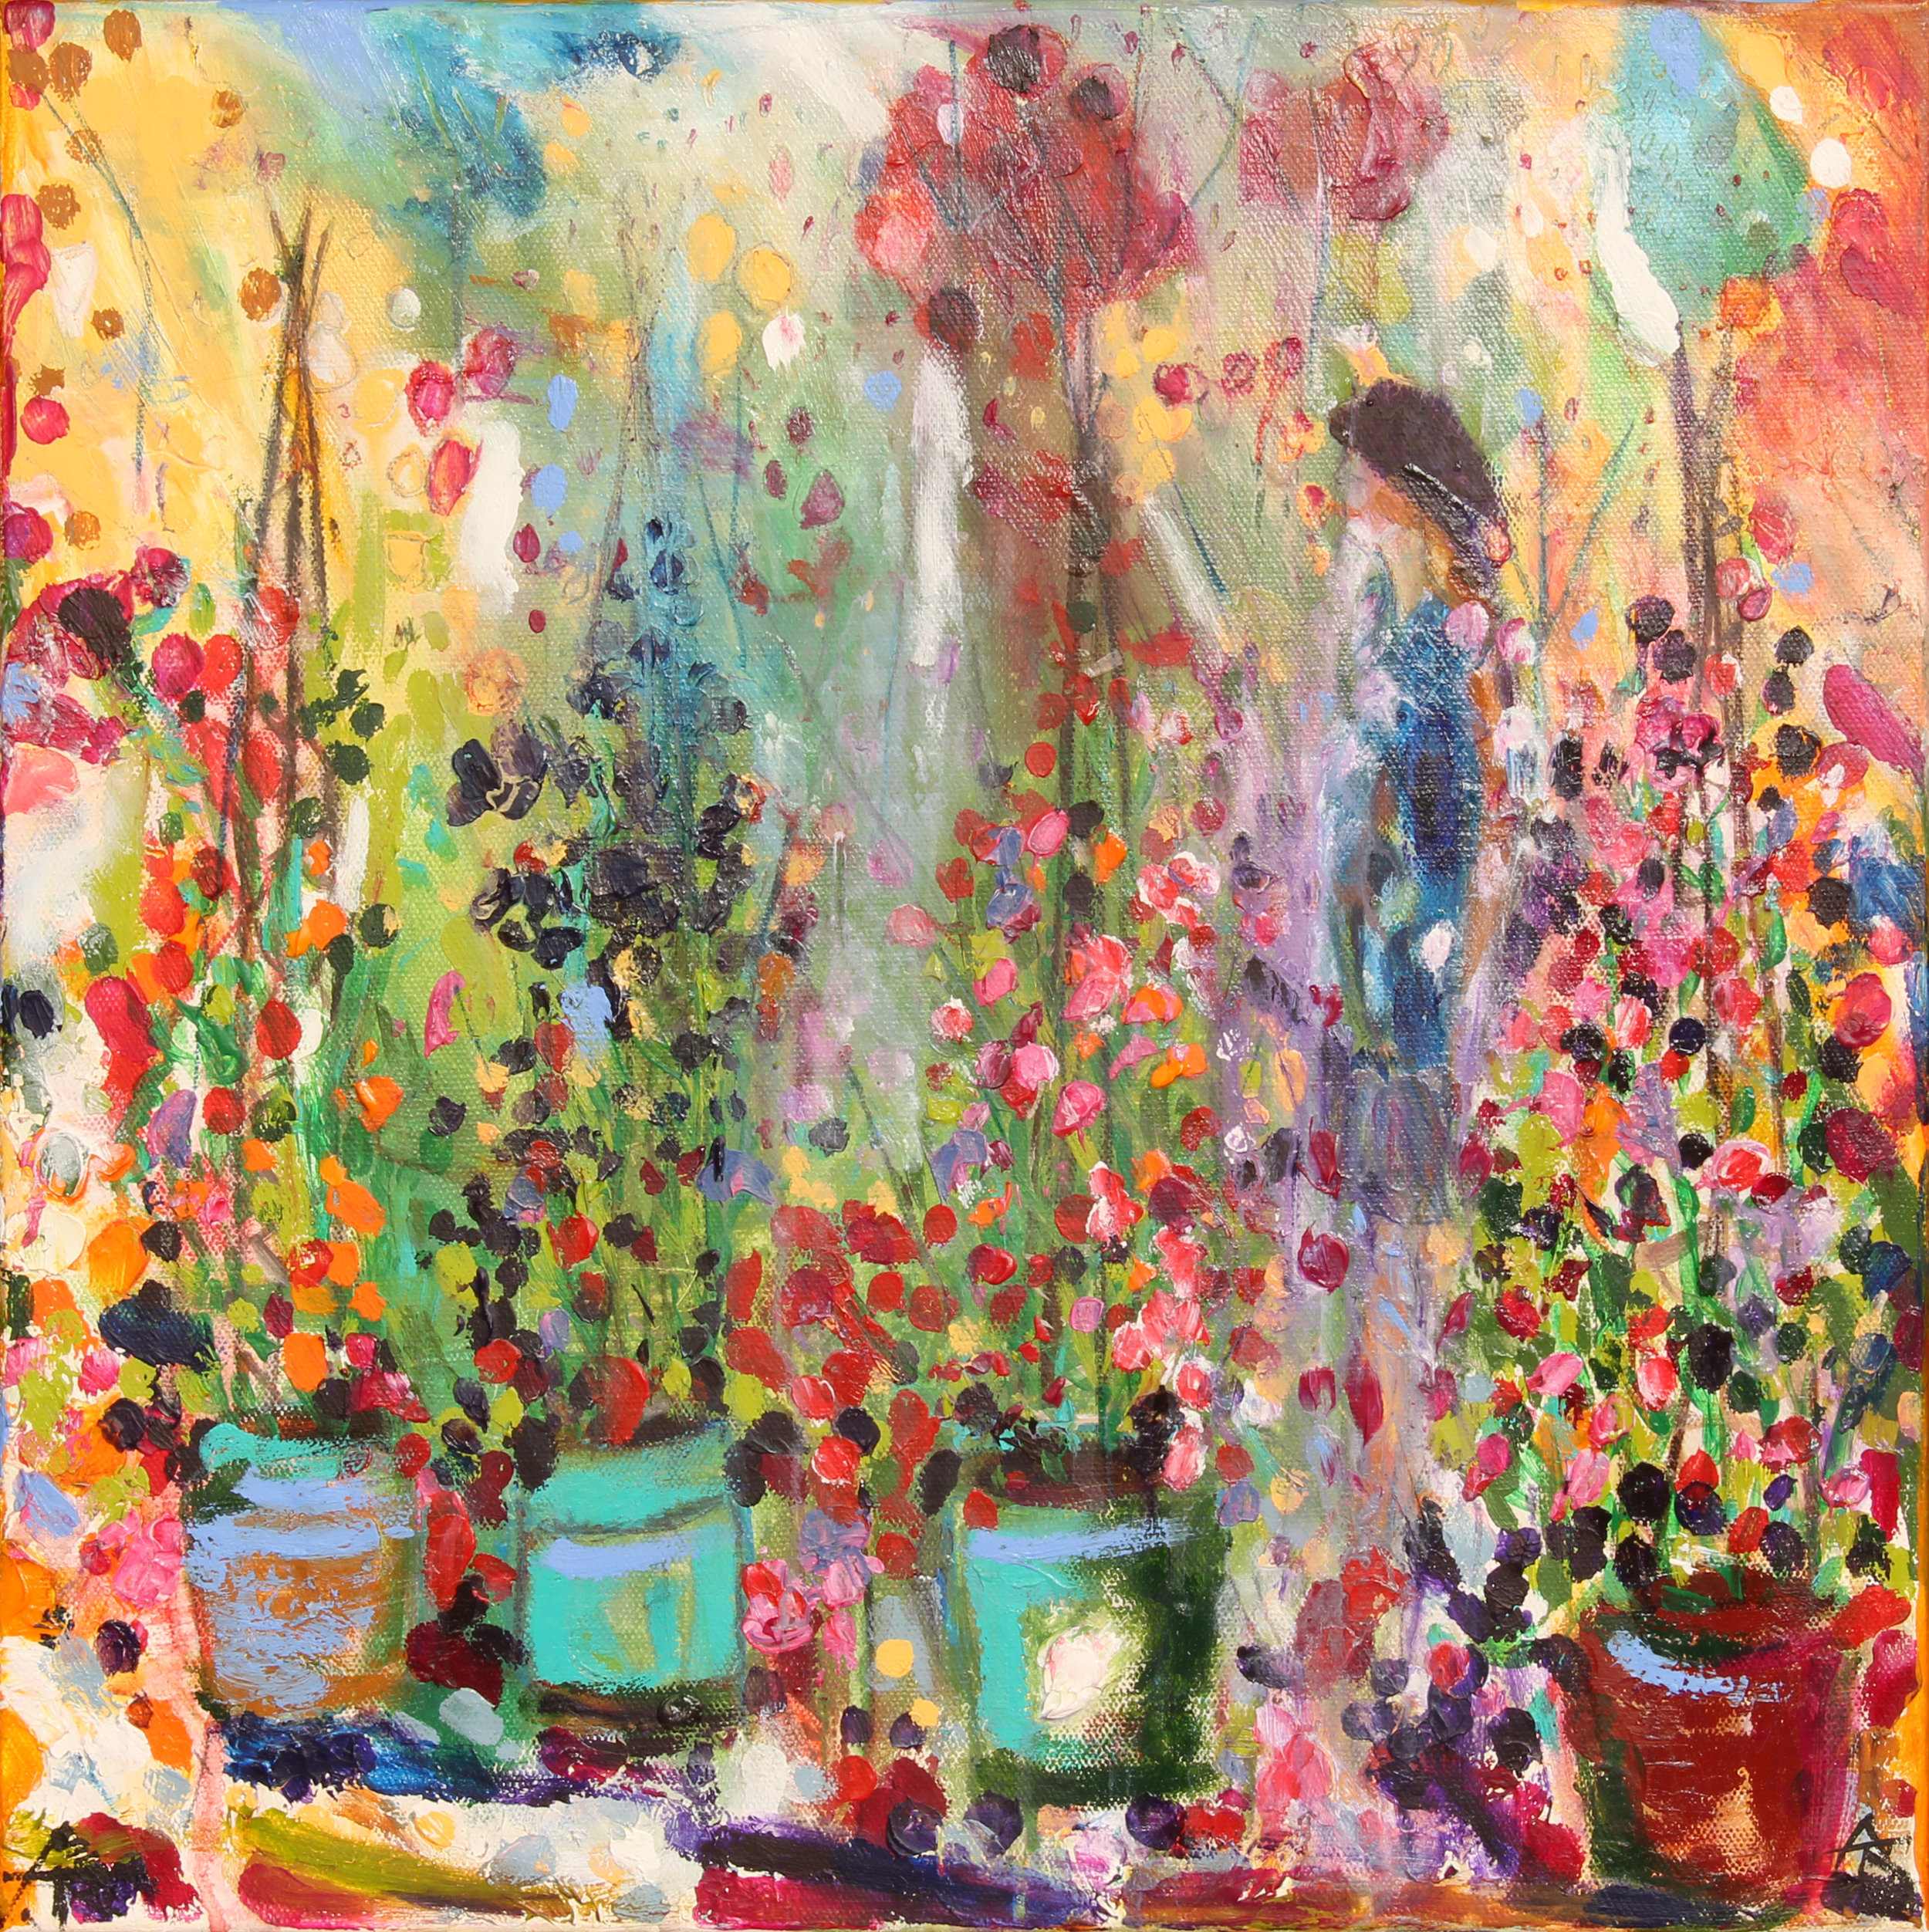 The Scent Of The Sweet Peas, acrylic on canvas, 46 x 46 cm, £450